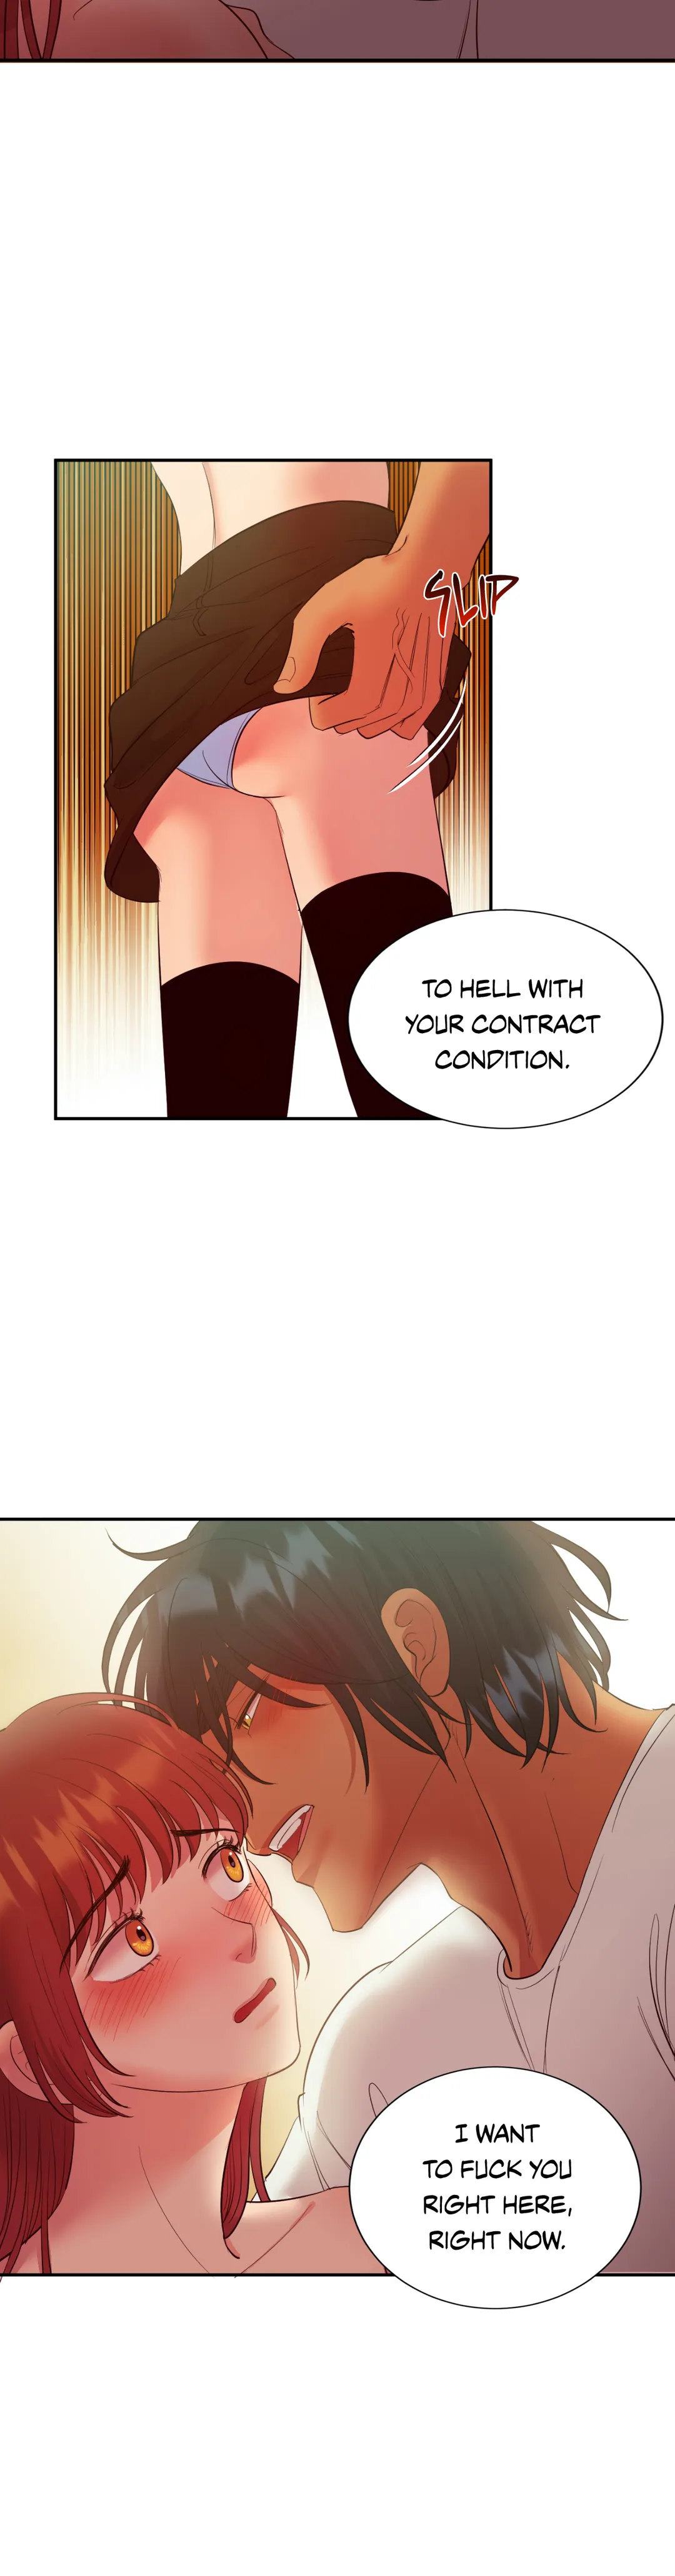 Hana’s Demons of Lust - Chapter 18 Page 21